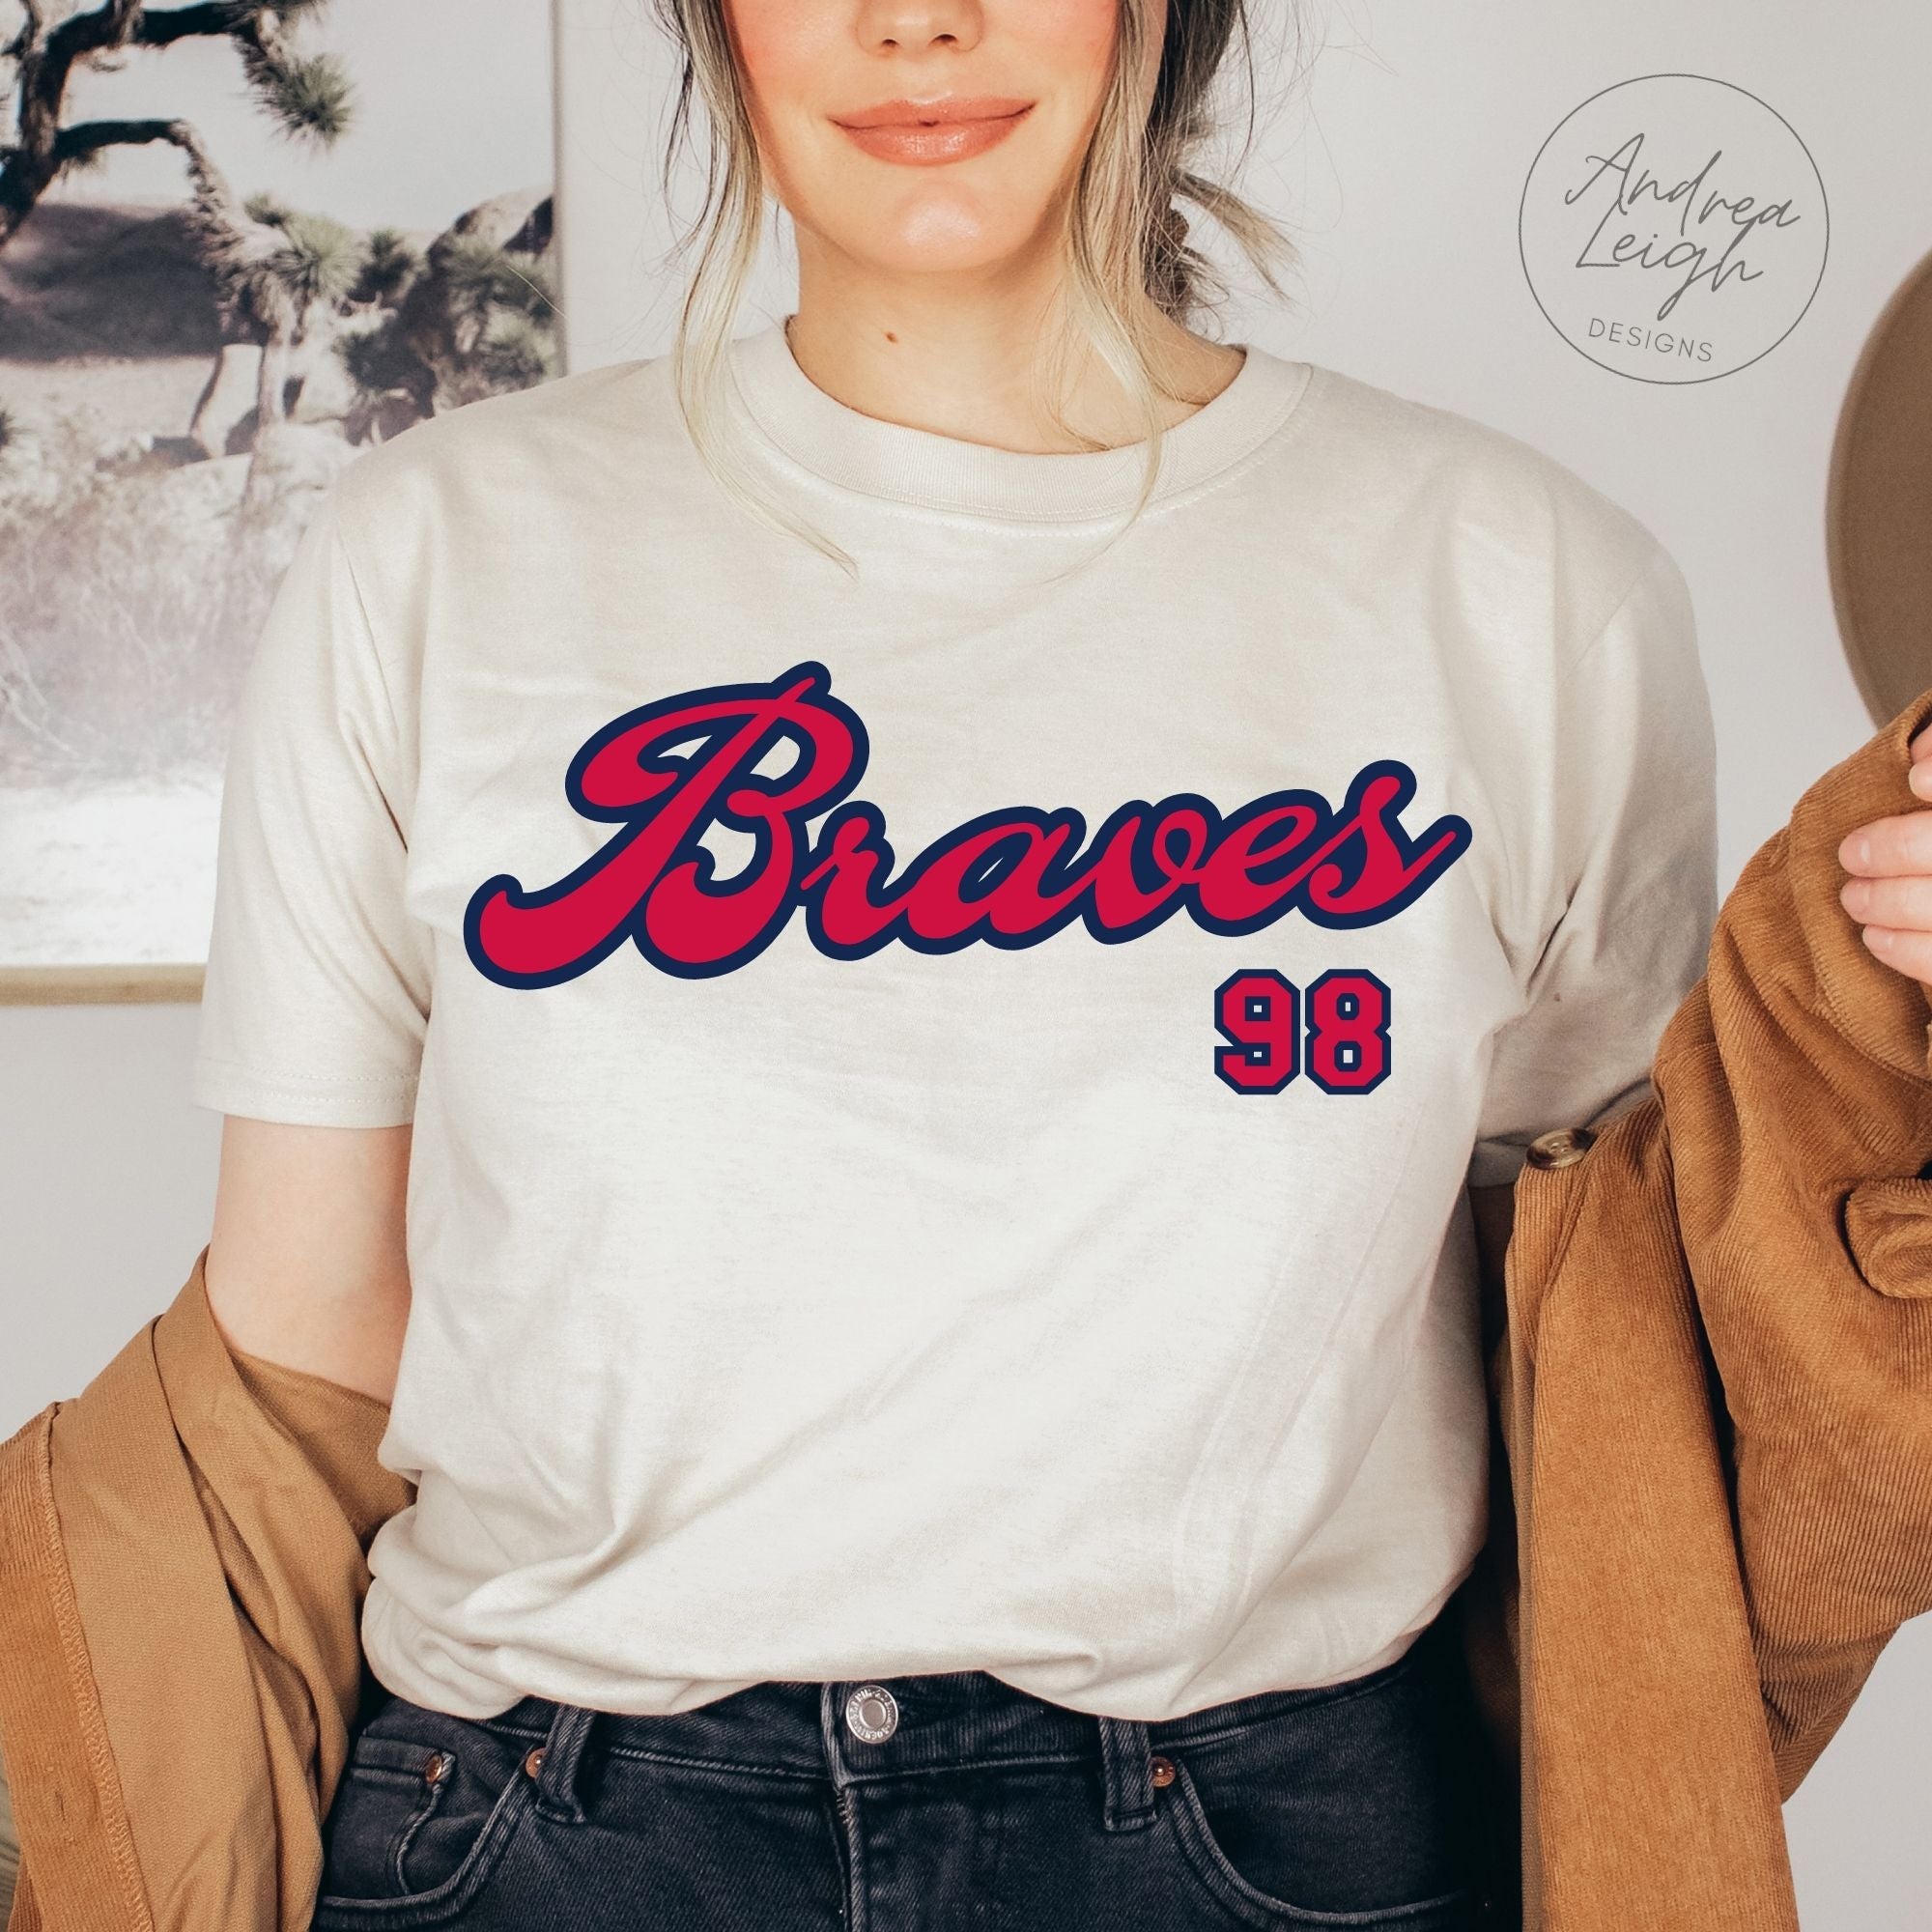 Braves 98 – Andrea Leigh Designs